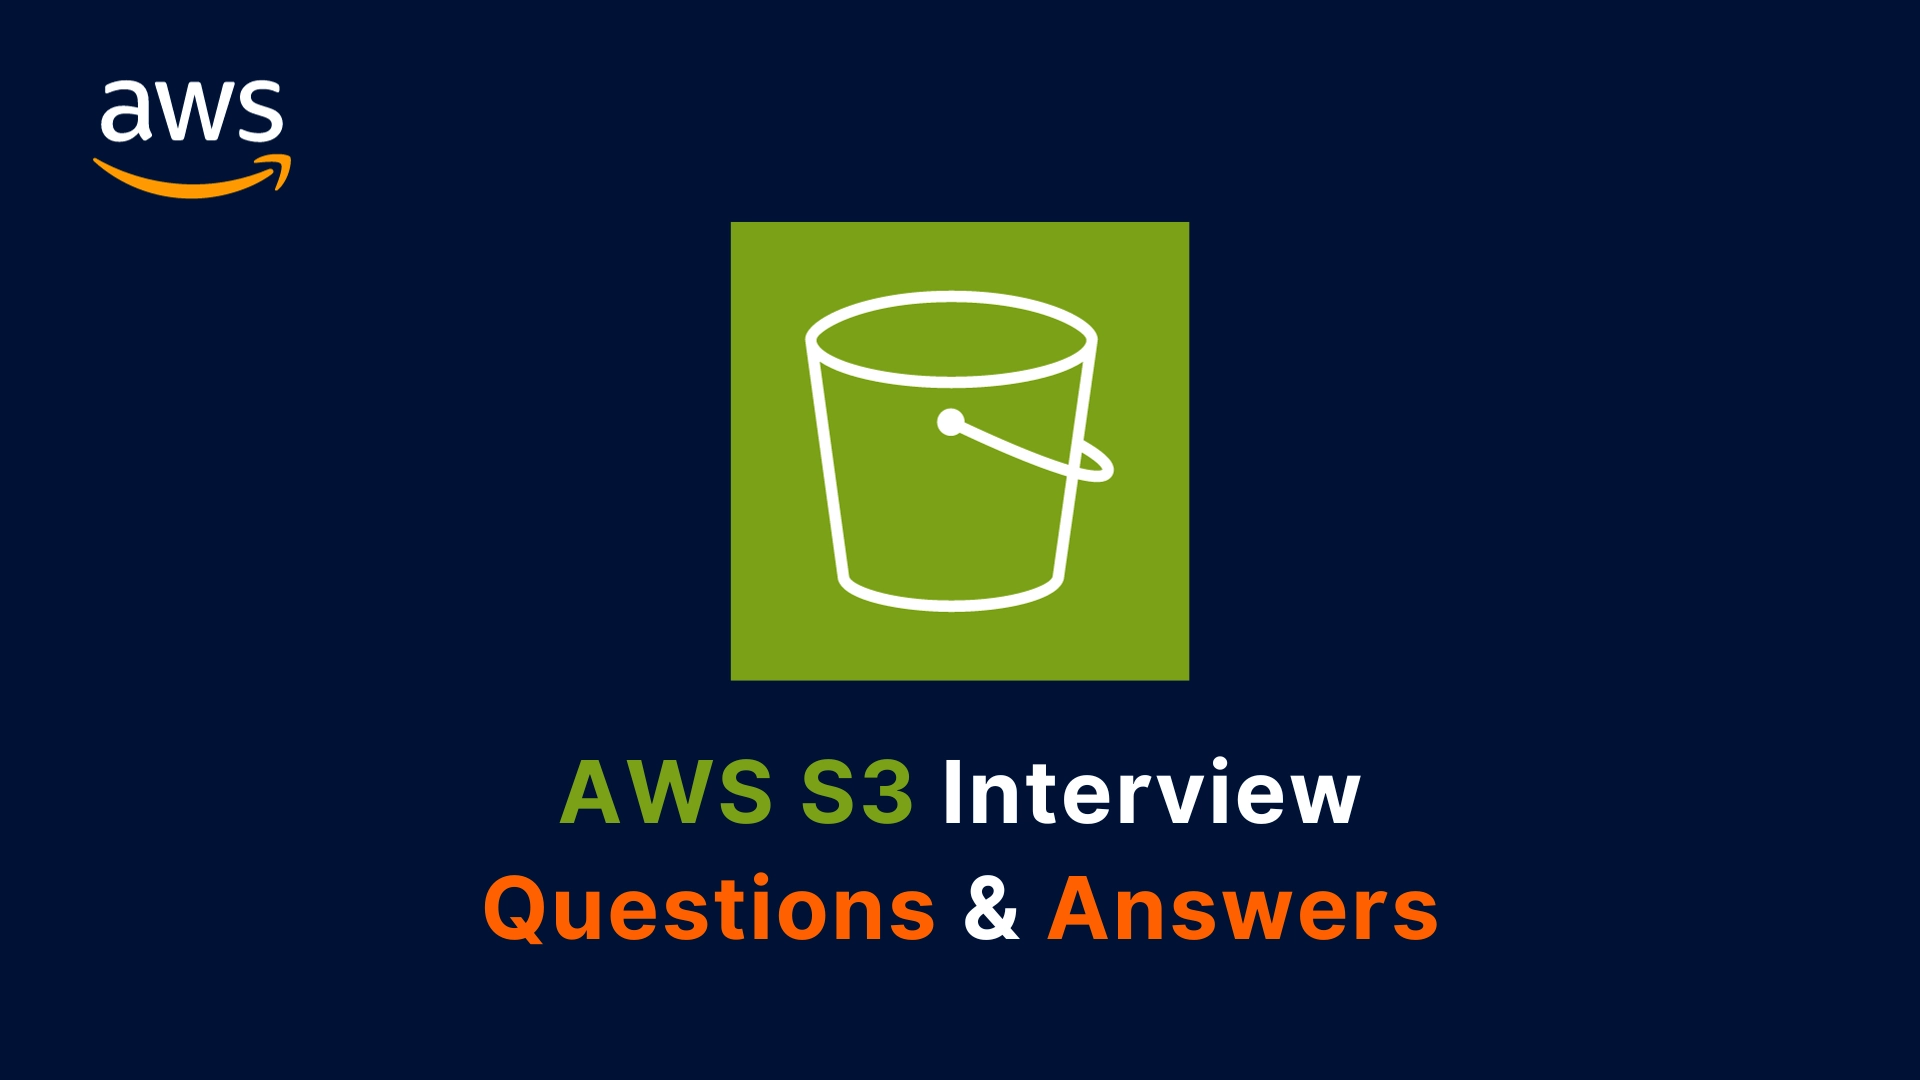 aws s3 interview questions and answers